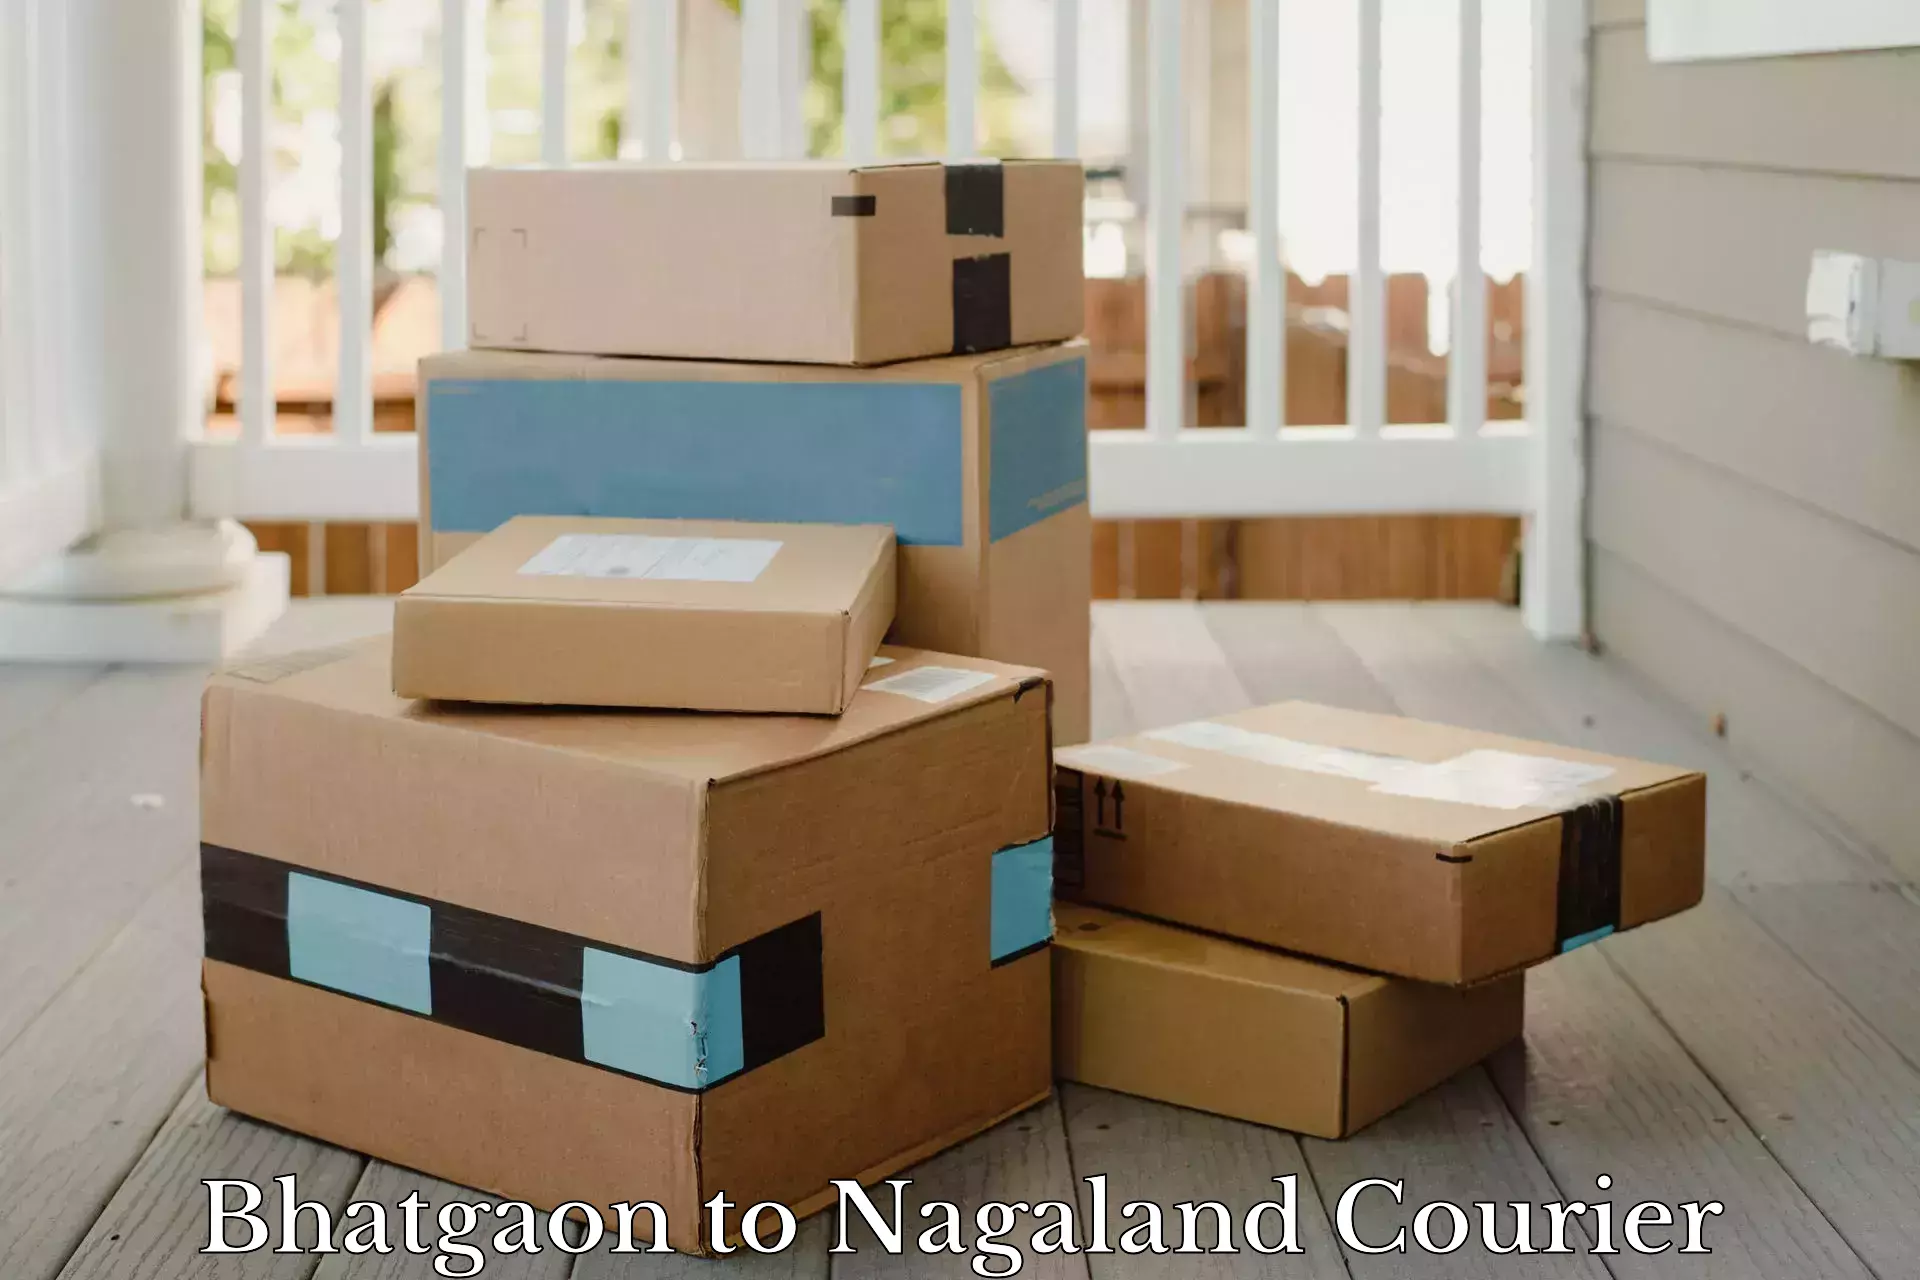 Nationwide parcel services Bhatgaon to Kohima